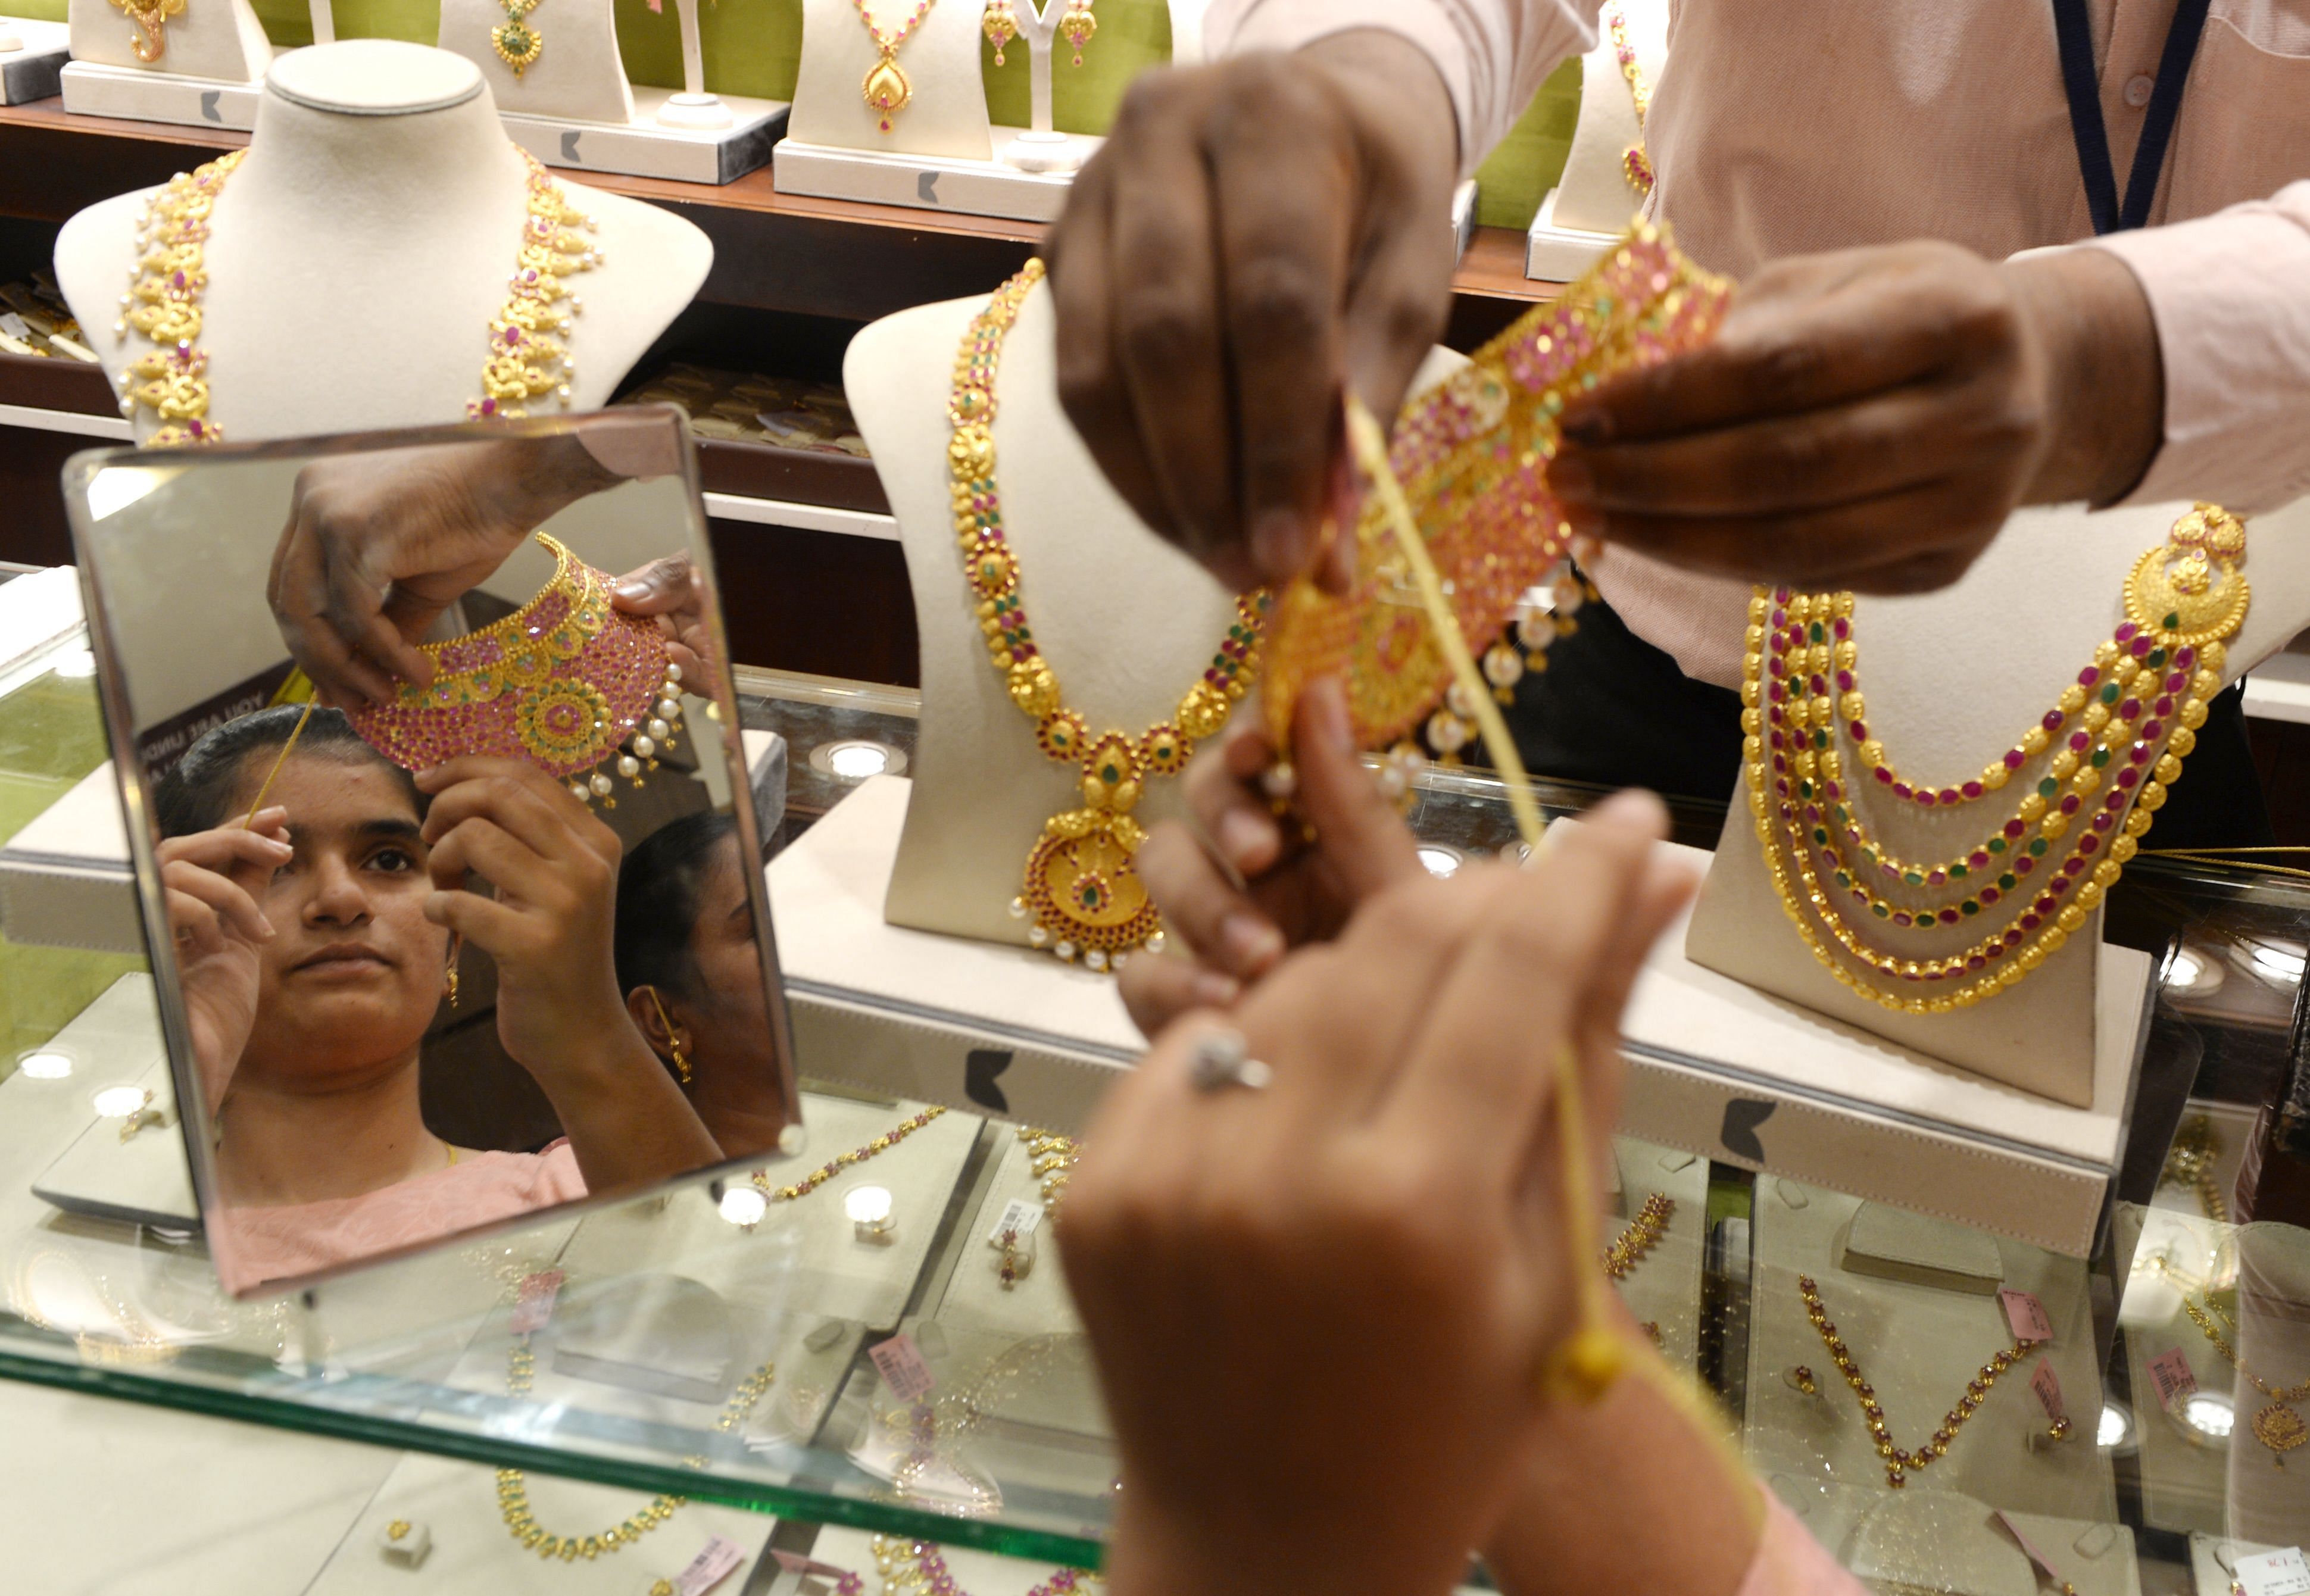 Gold jewellery buying is considered auspicious during Akshaya Tritiya, which falls in the last week of April this year. (AFP photo)